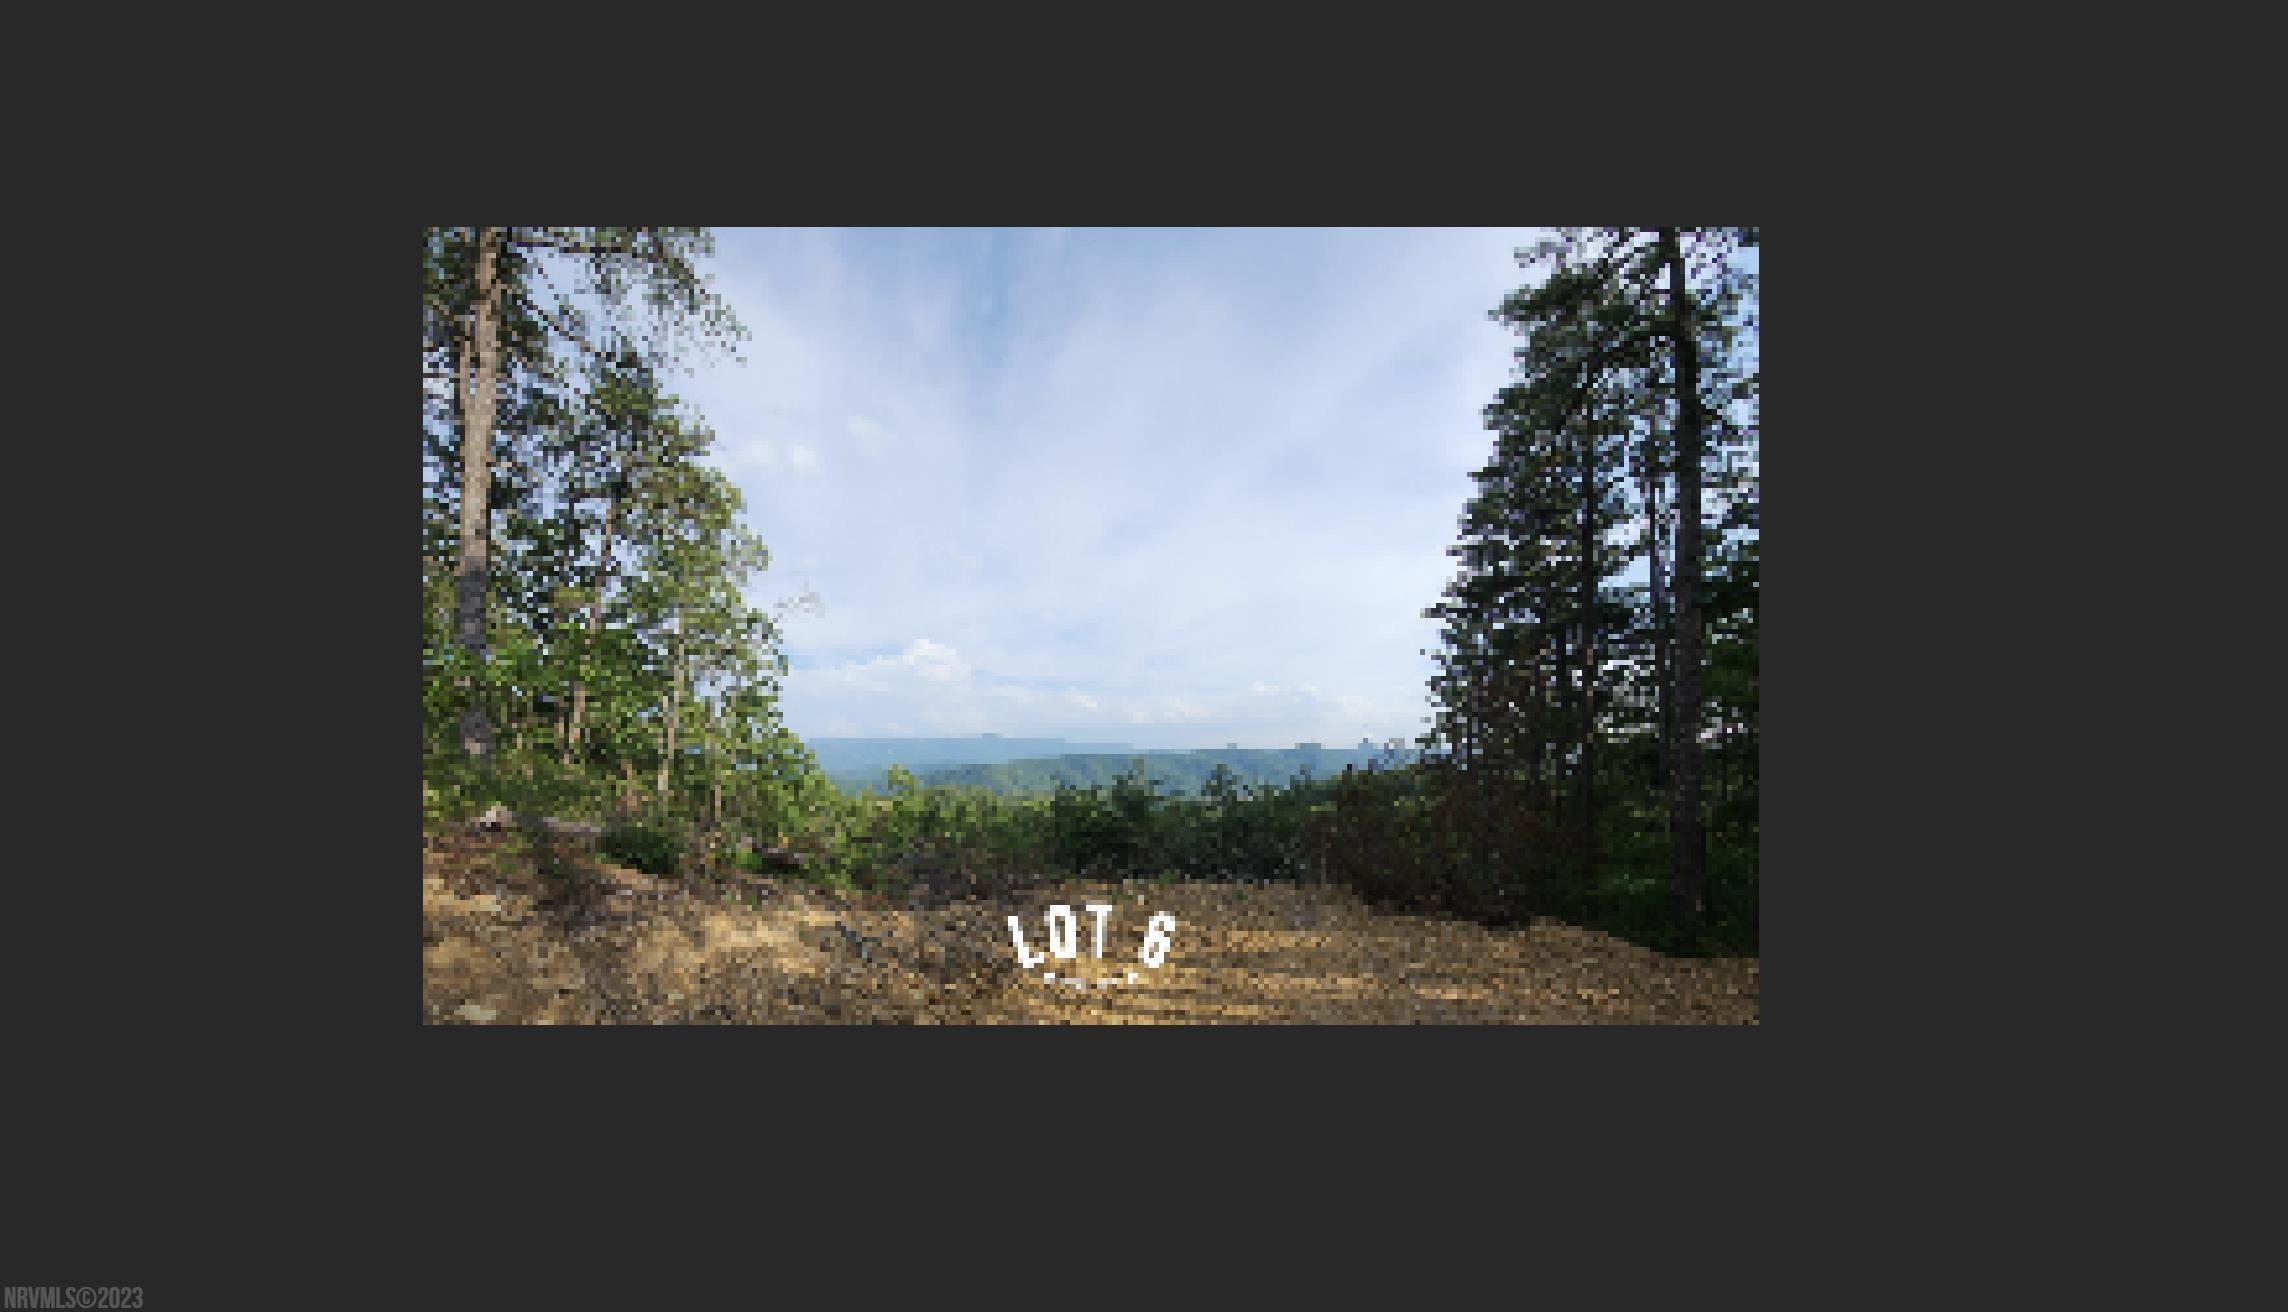 This 20 acres of land has a potential home site ready for your dream home or a fun 'get away' cabin. The views will make you want to not leave home. This property is a must see if you love views, woods, and/or country living.